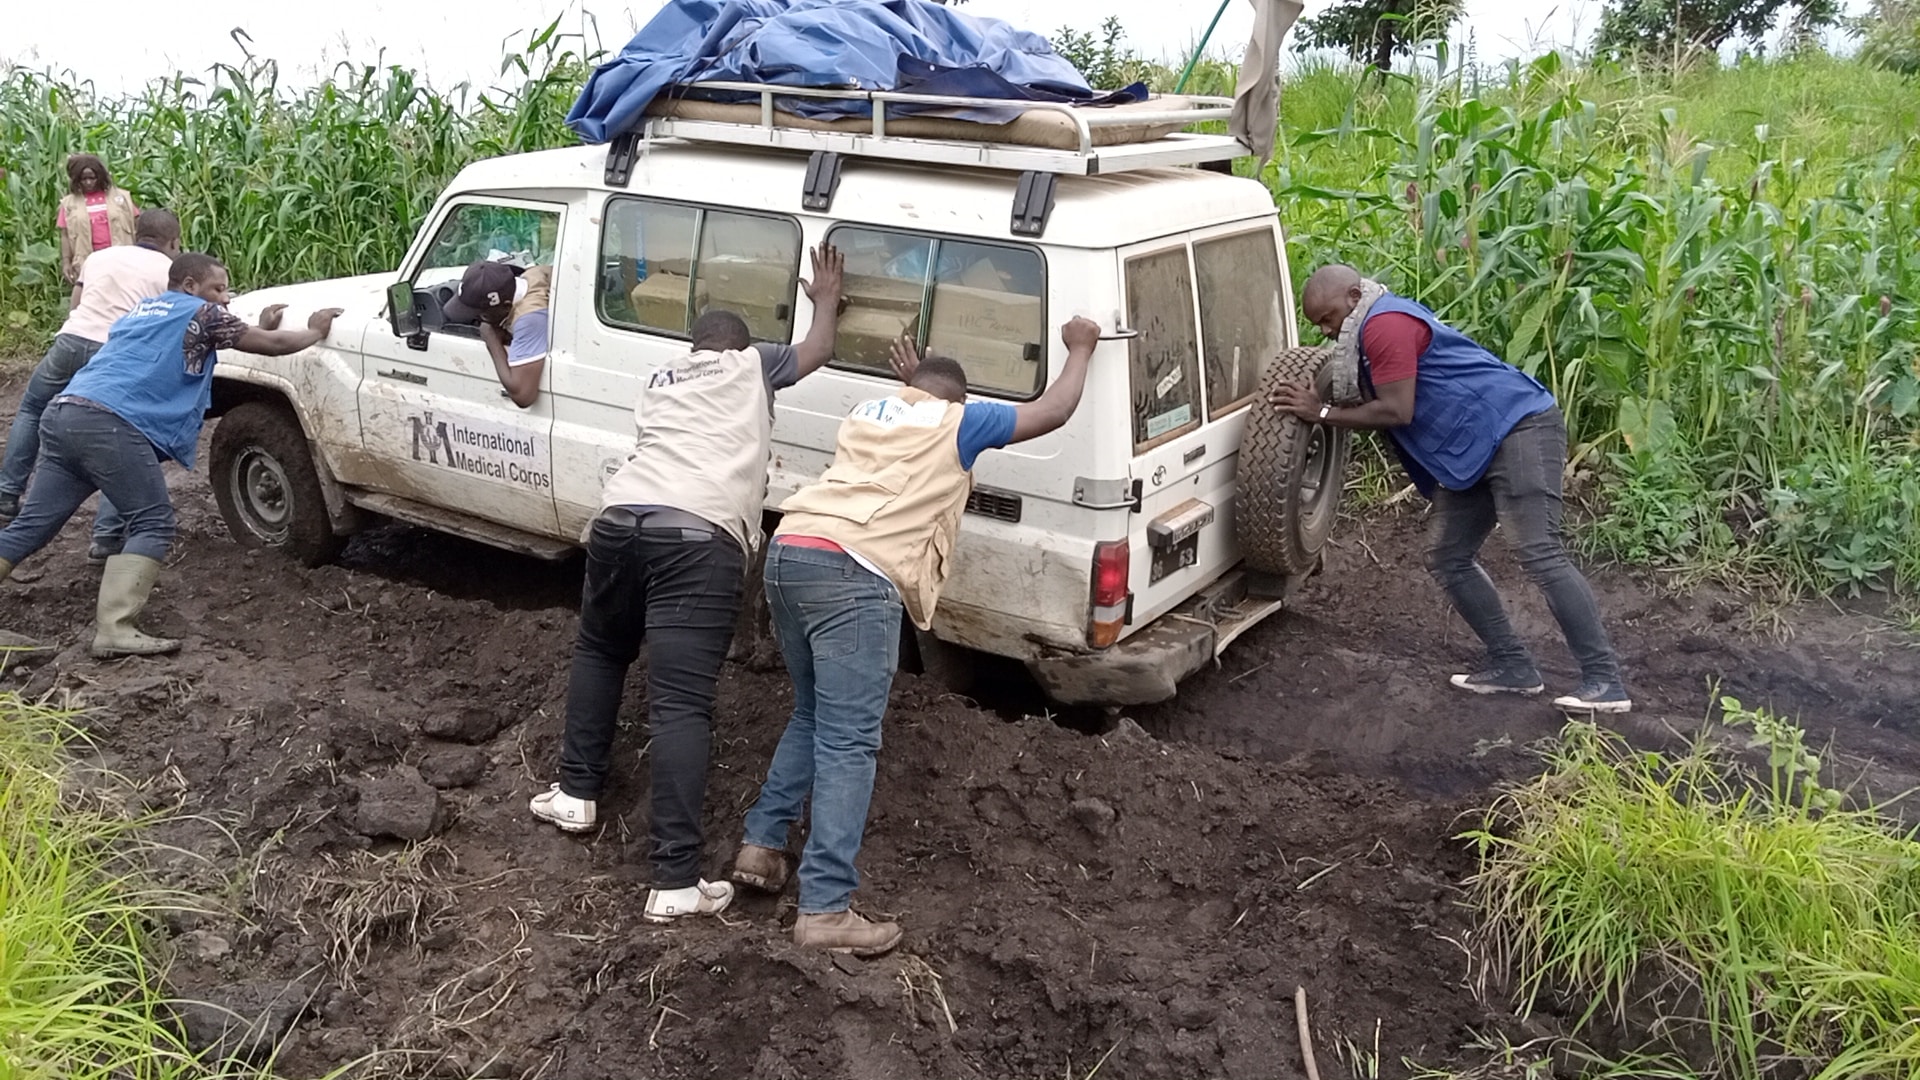 Members of the IMC push a truck carrying medical workers and supplies in rough terrain